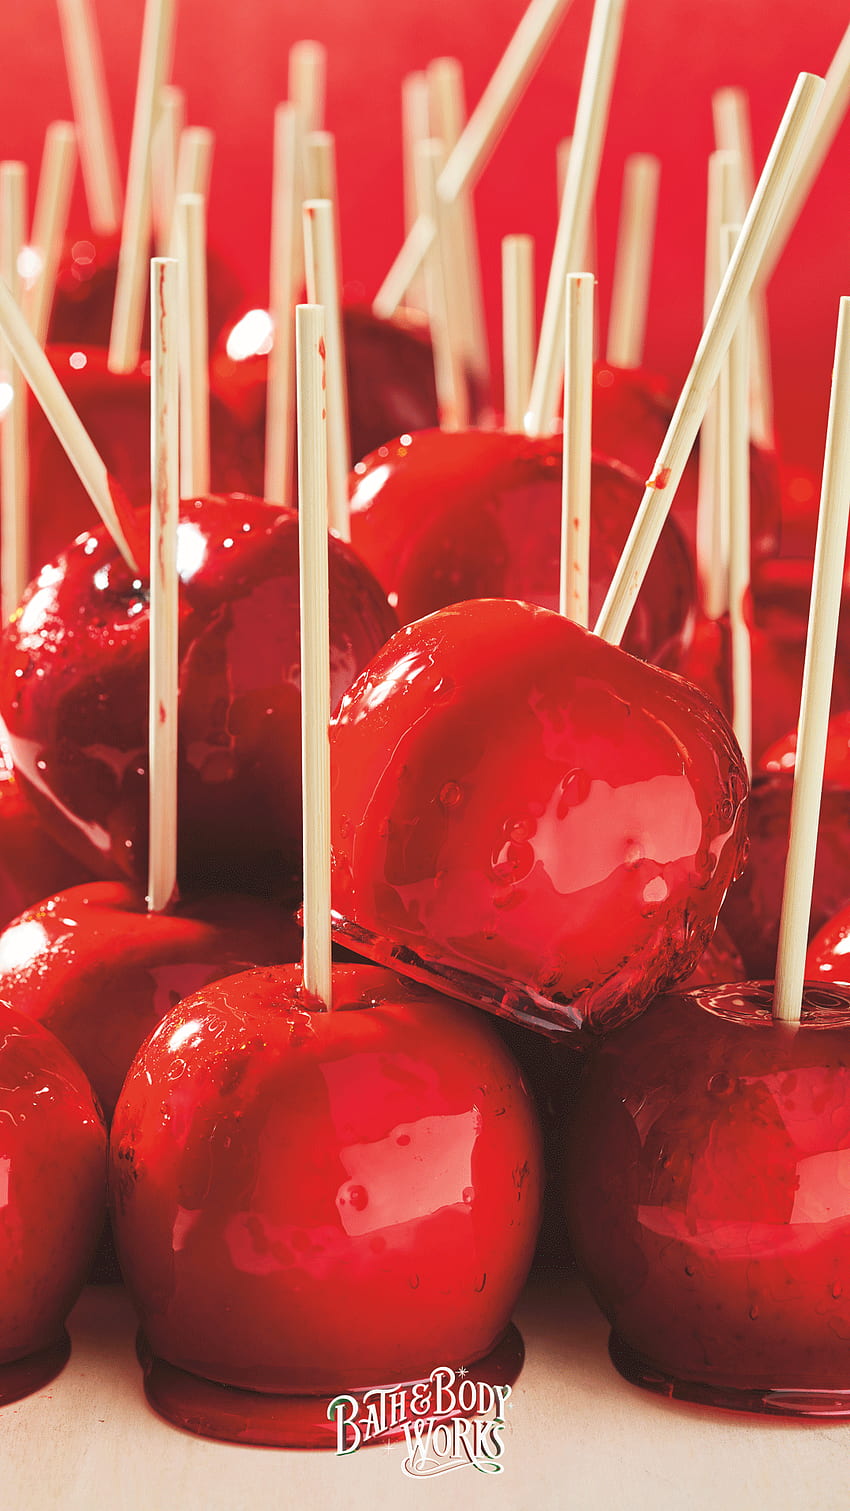 Candy Apple iPhone . Christmas , Words , Bath and body works HD phone wallpaper